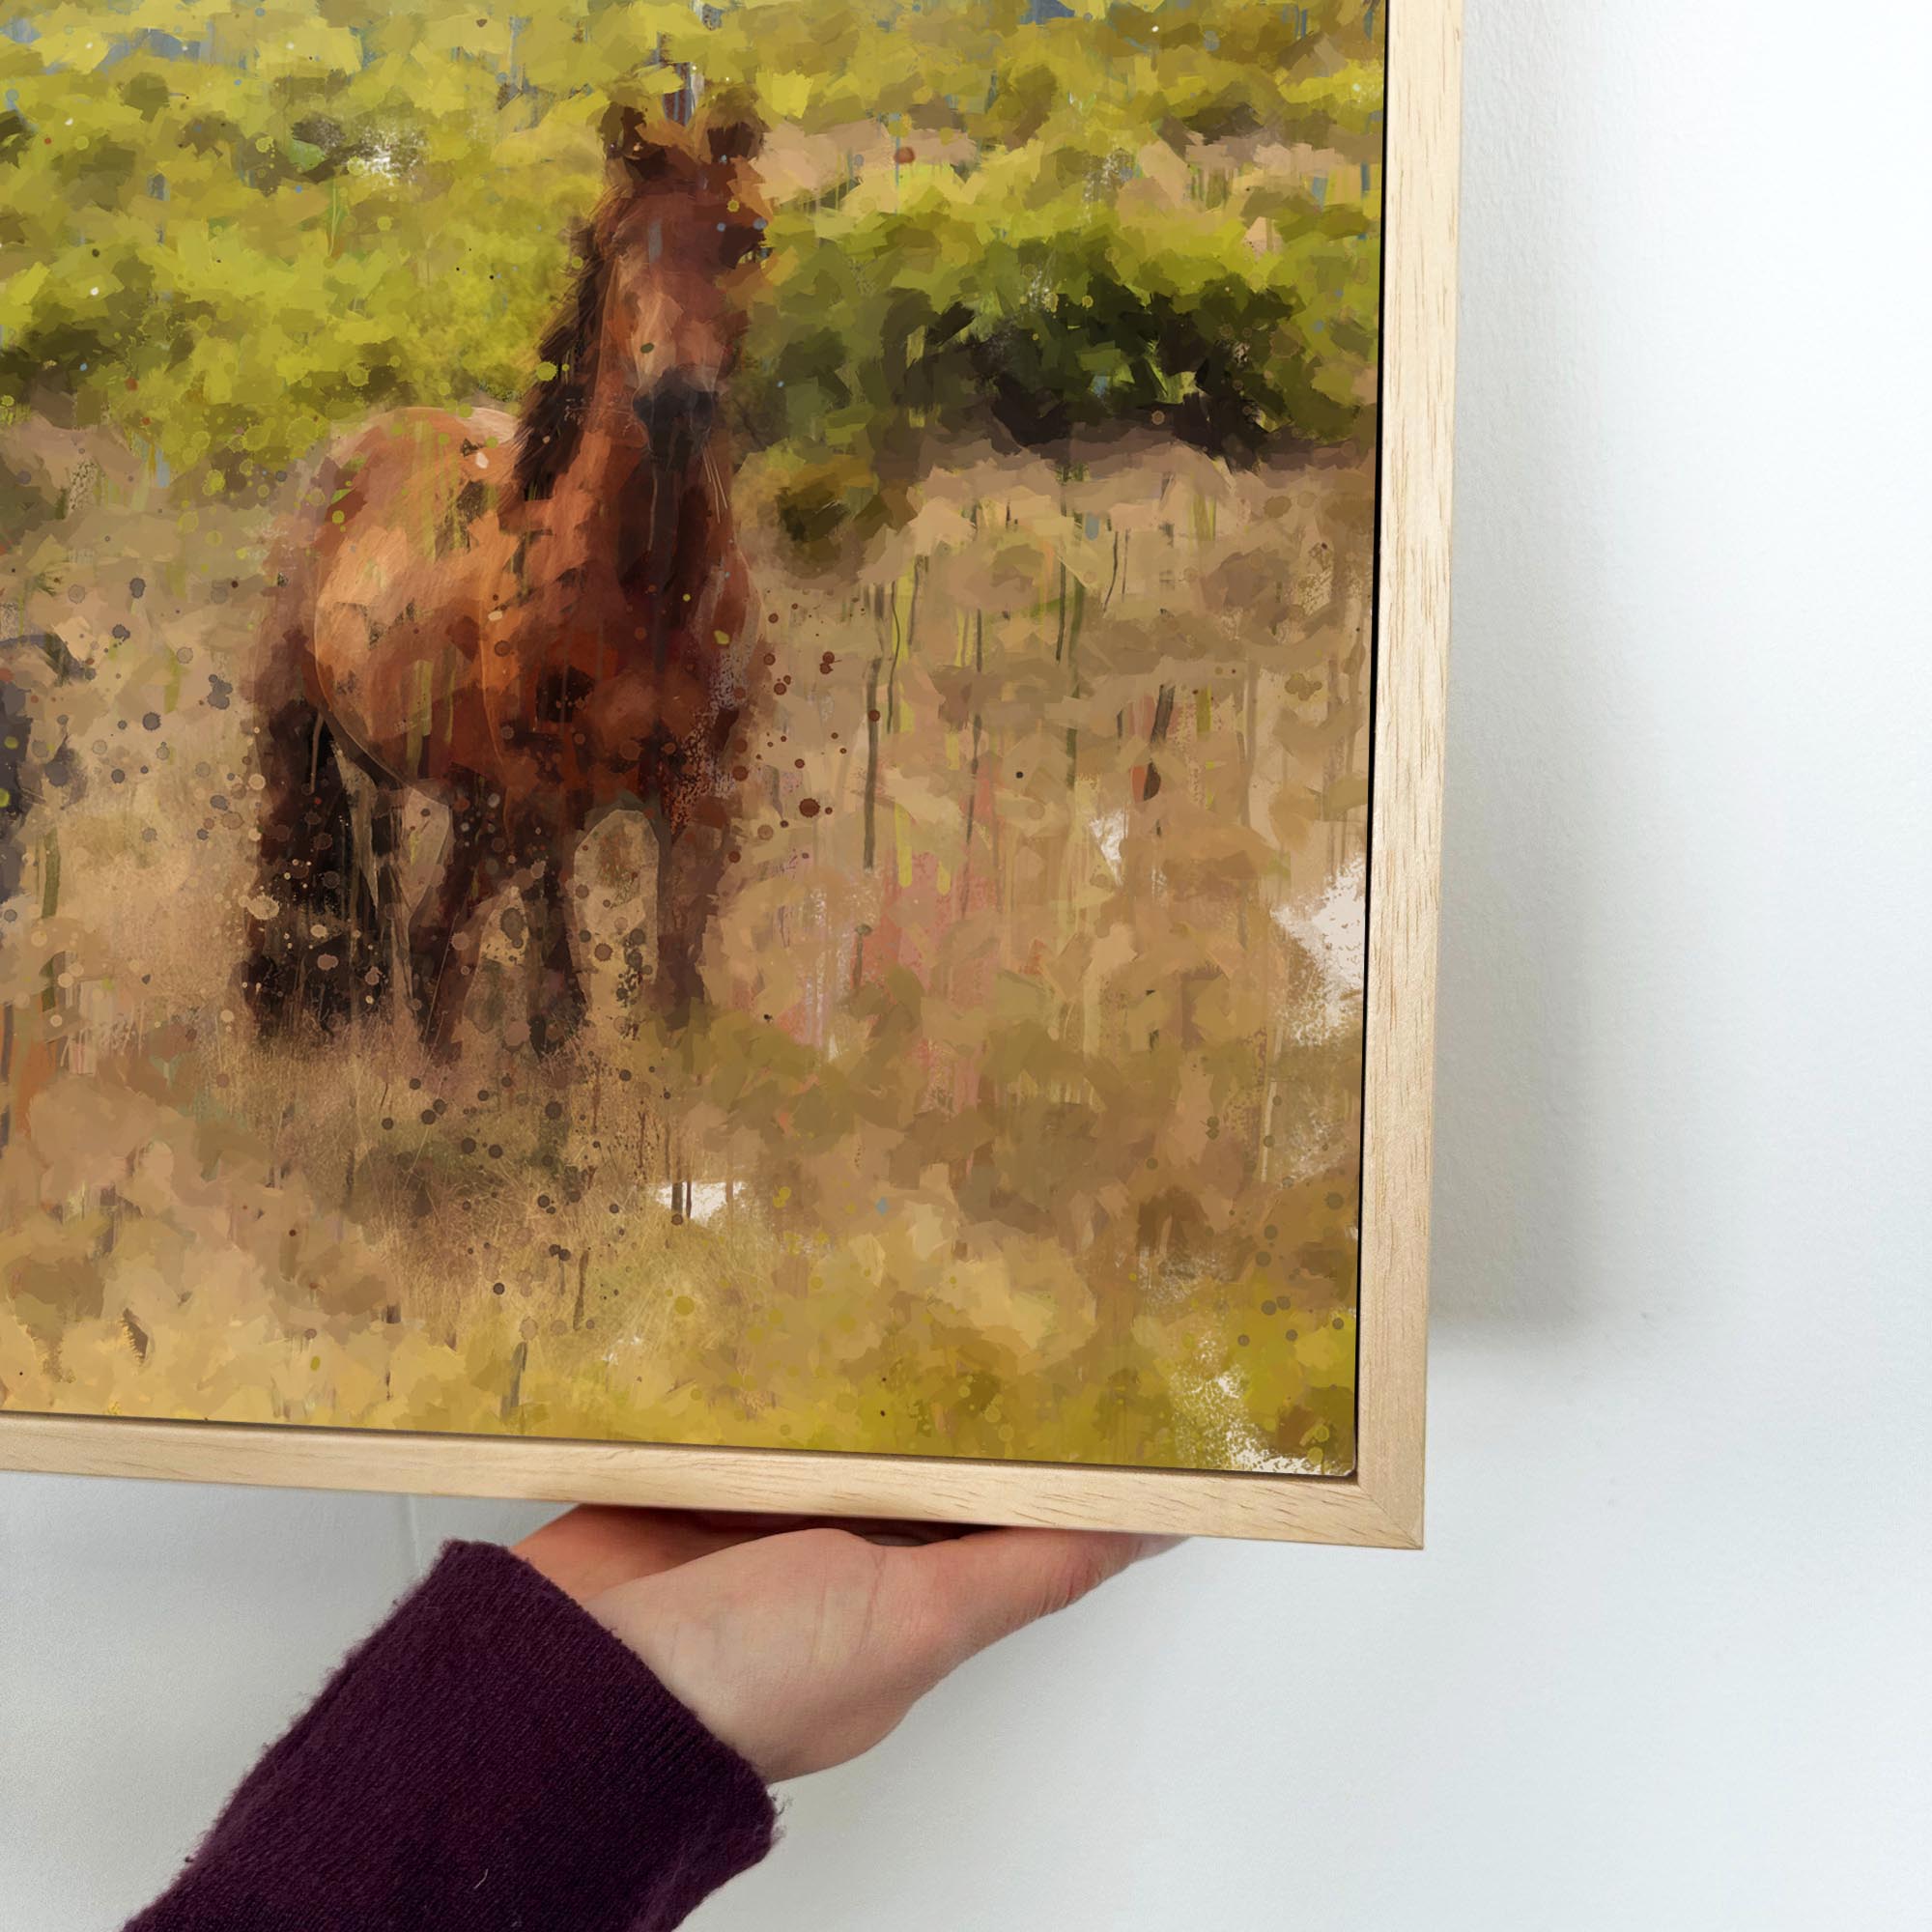 Horses In A Field Painting Canvas Print